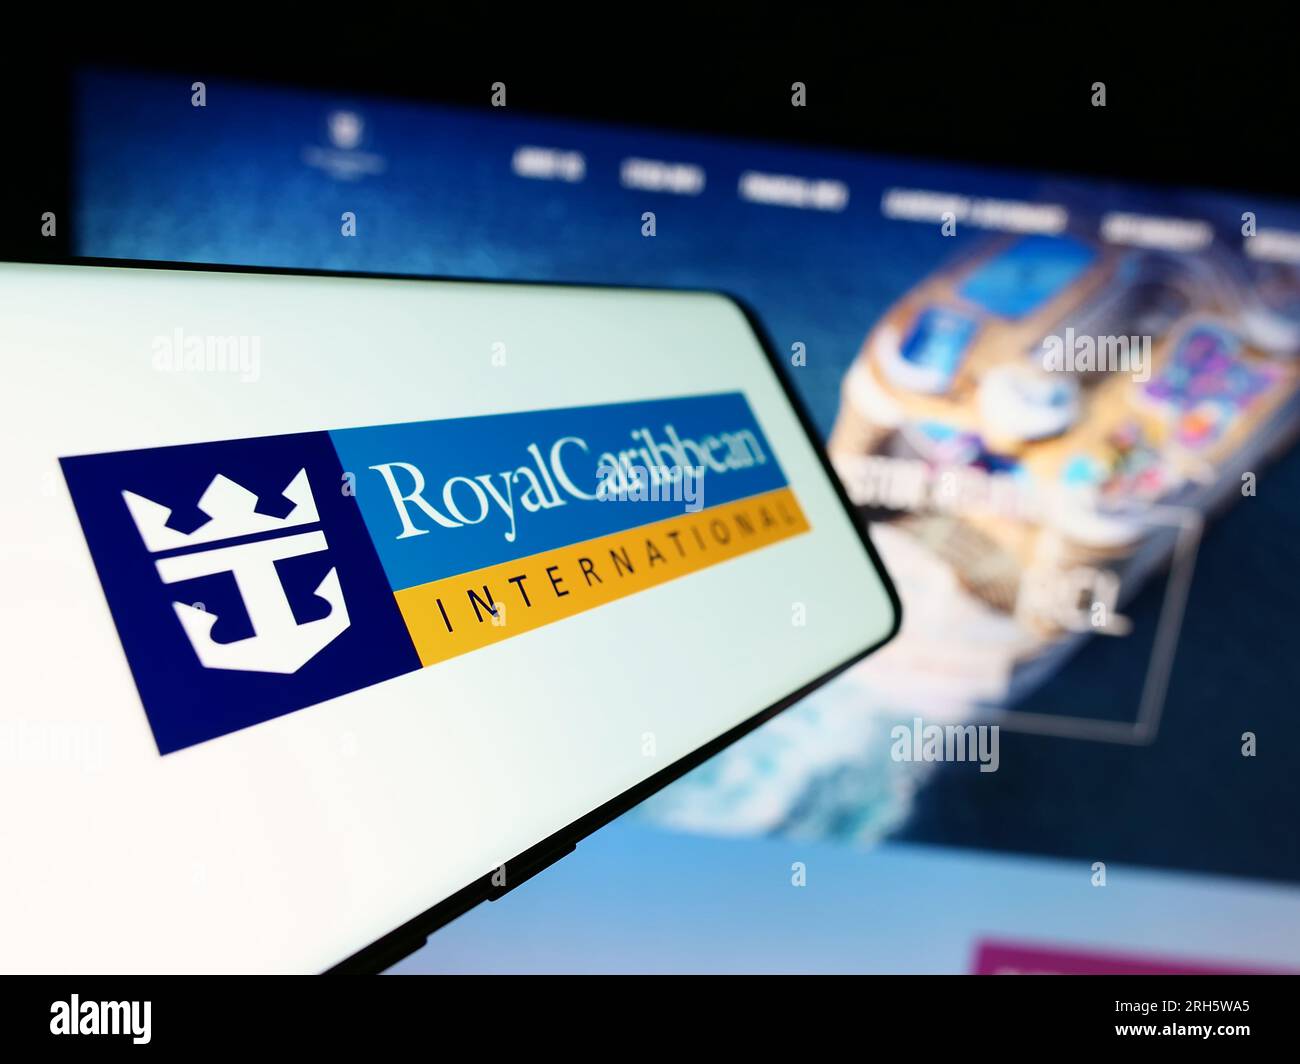 Cellphone with logo of company Royal Caribbean International (RCI) on screen in front of business website. Focus on center-left of phone display. Stock Photo